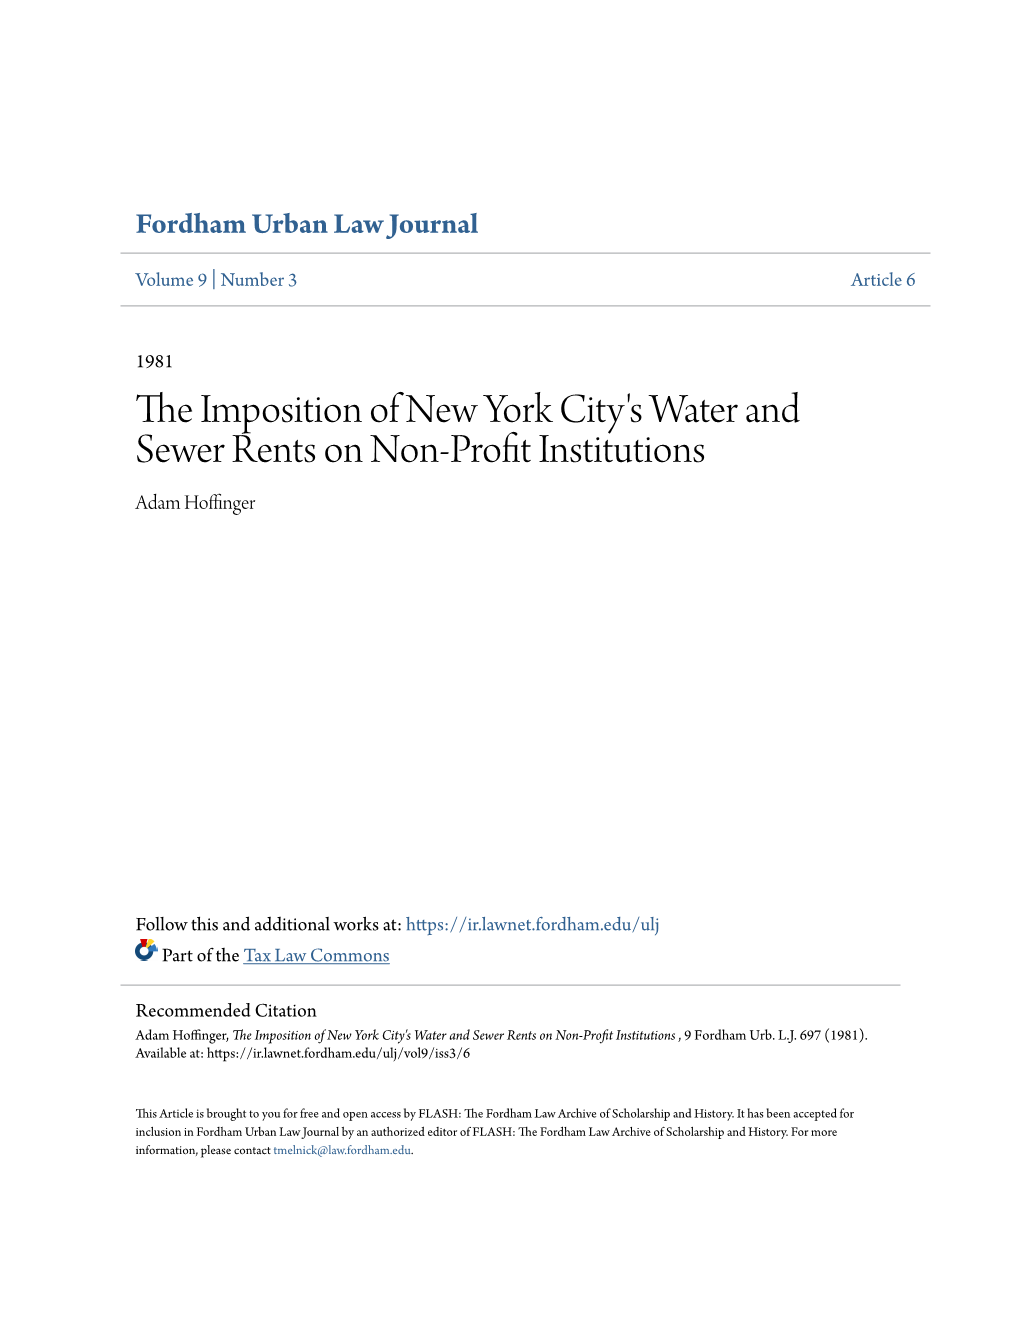 The Imposition of New York City's Water and Sewer Rents on Non-Profit Ni Stitutions , 9 Fordham Urb